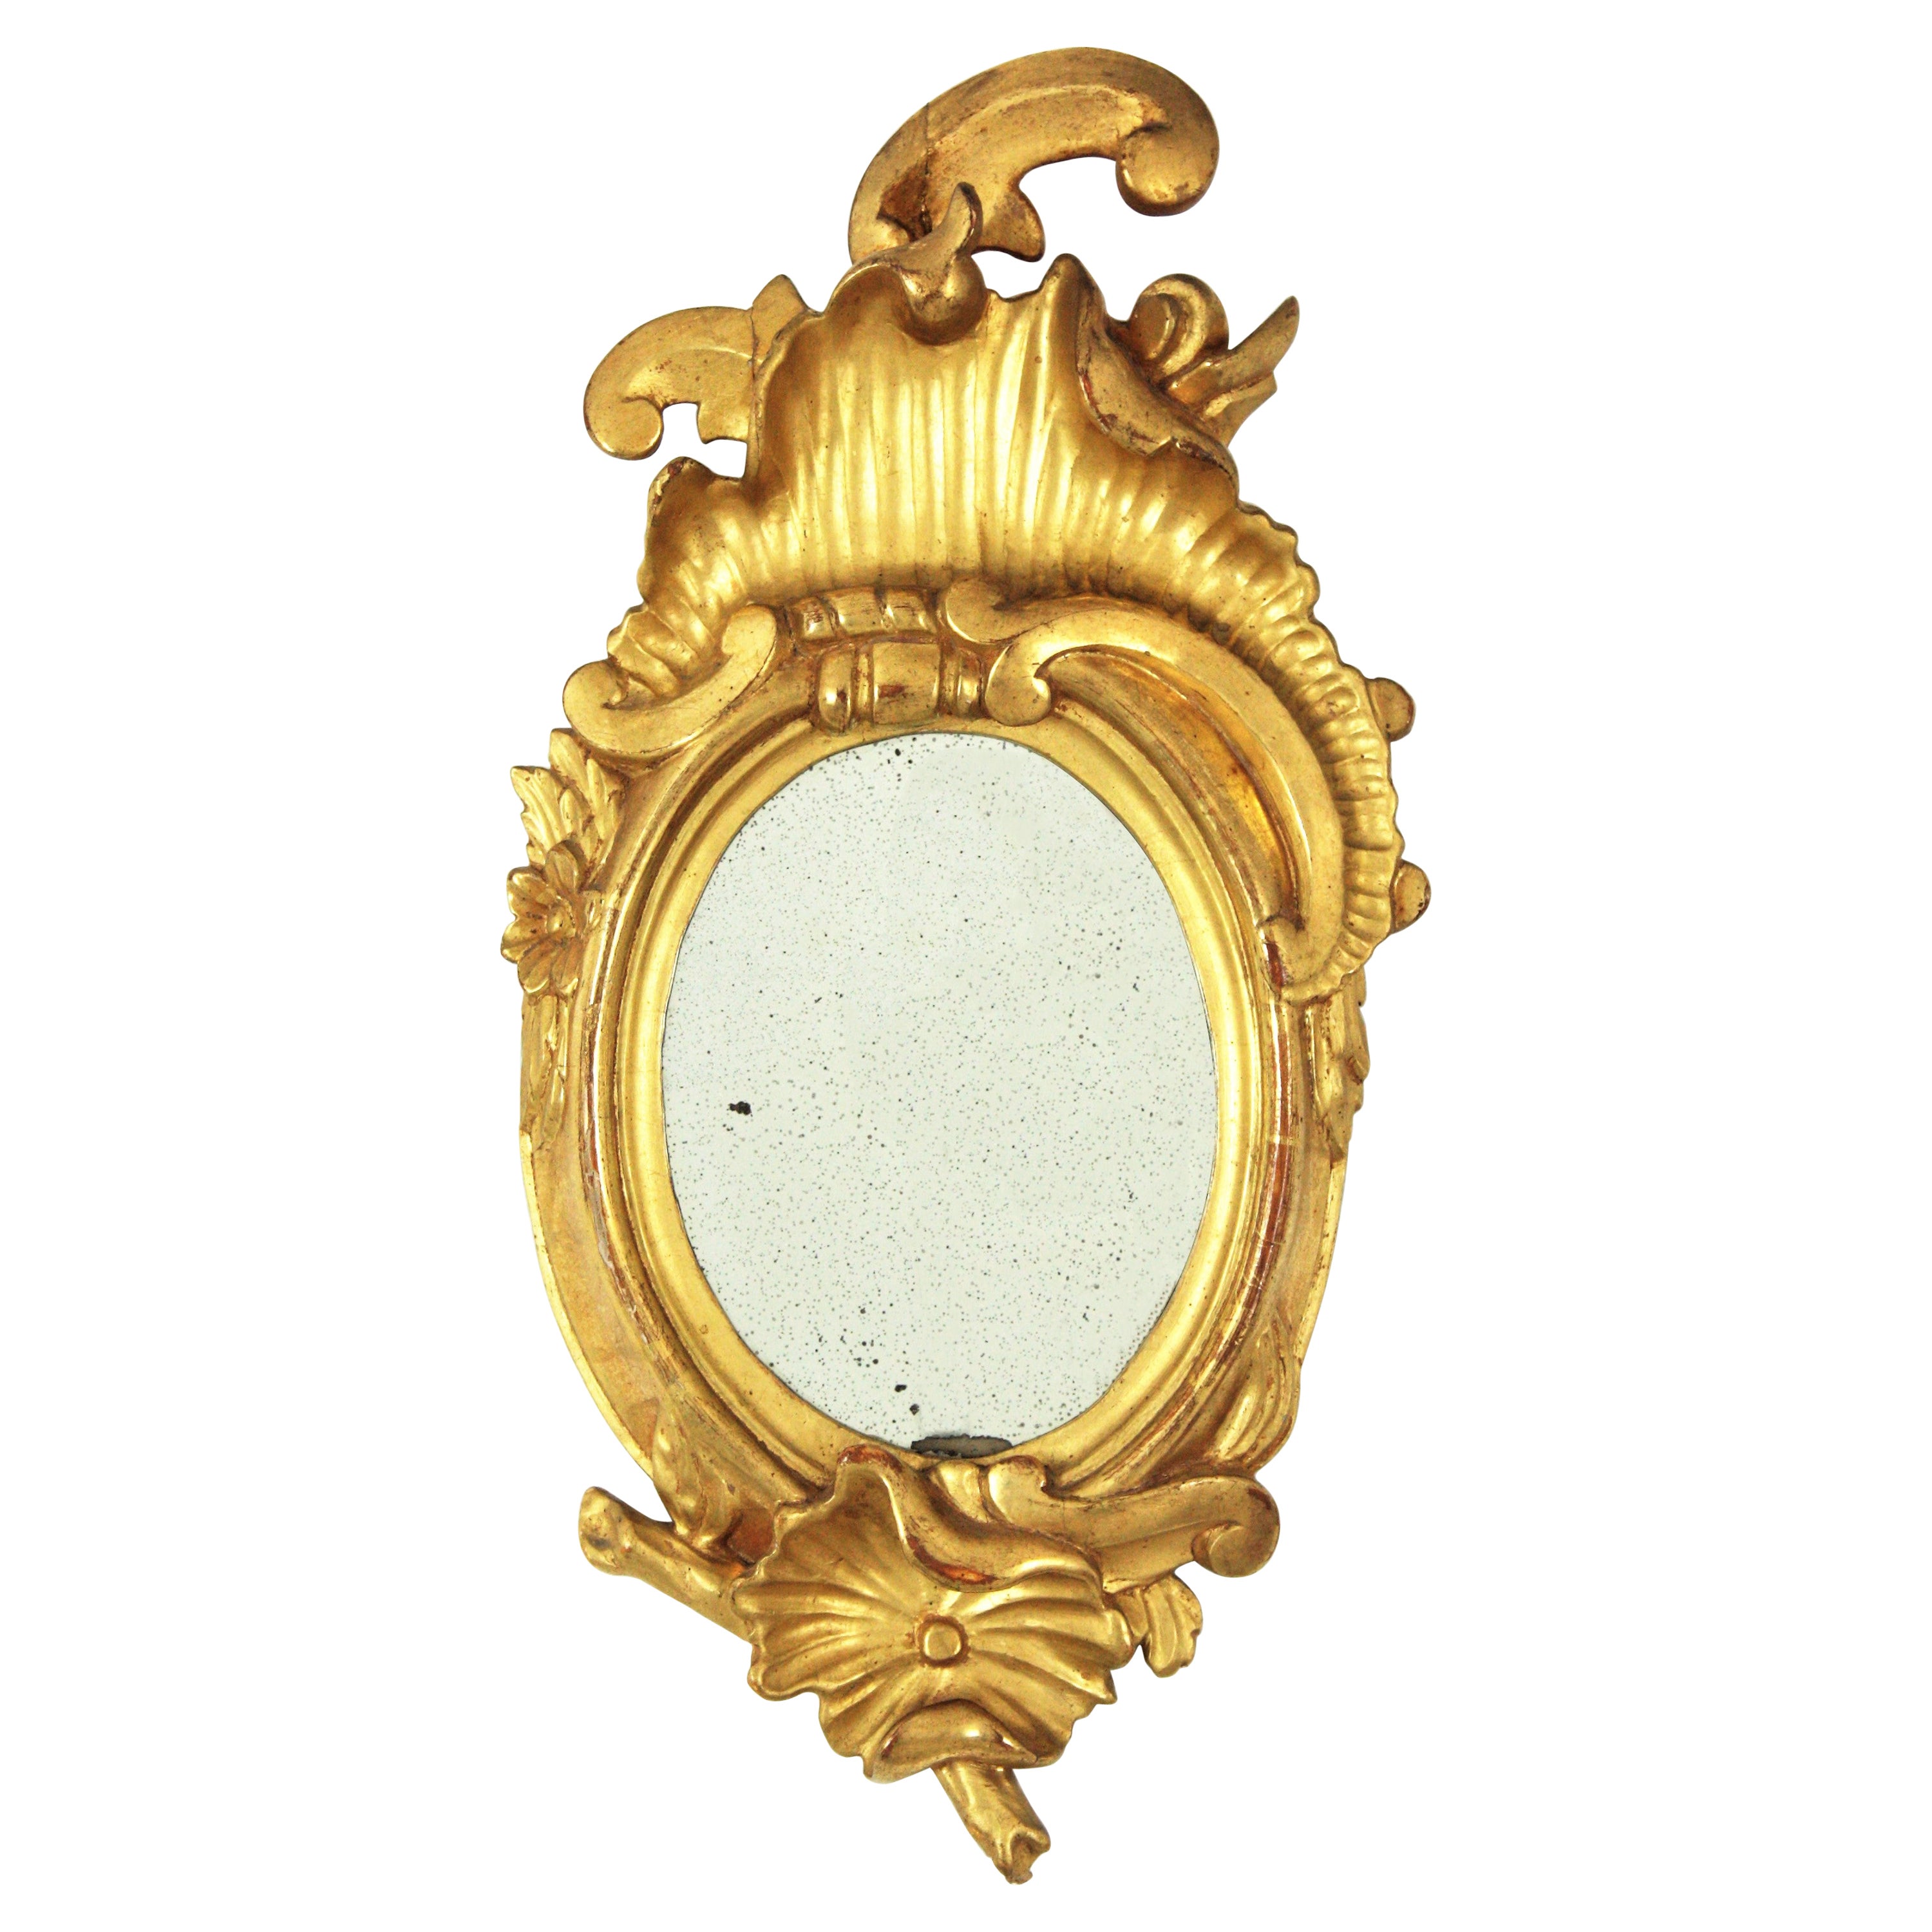 Carved Giltwood Art Nouveau Mirror in Small Scale